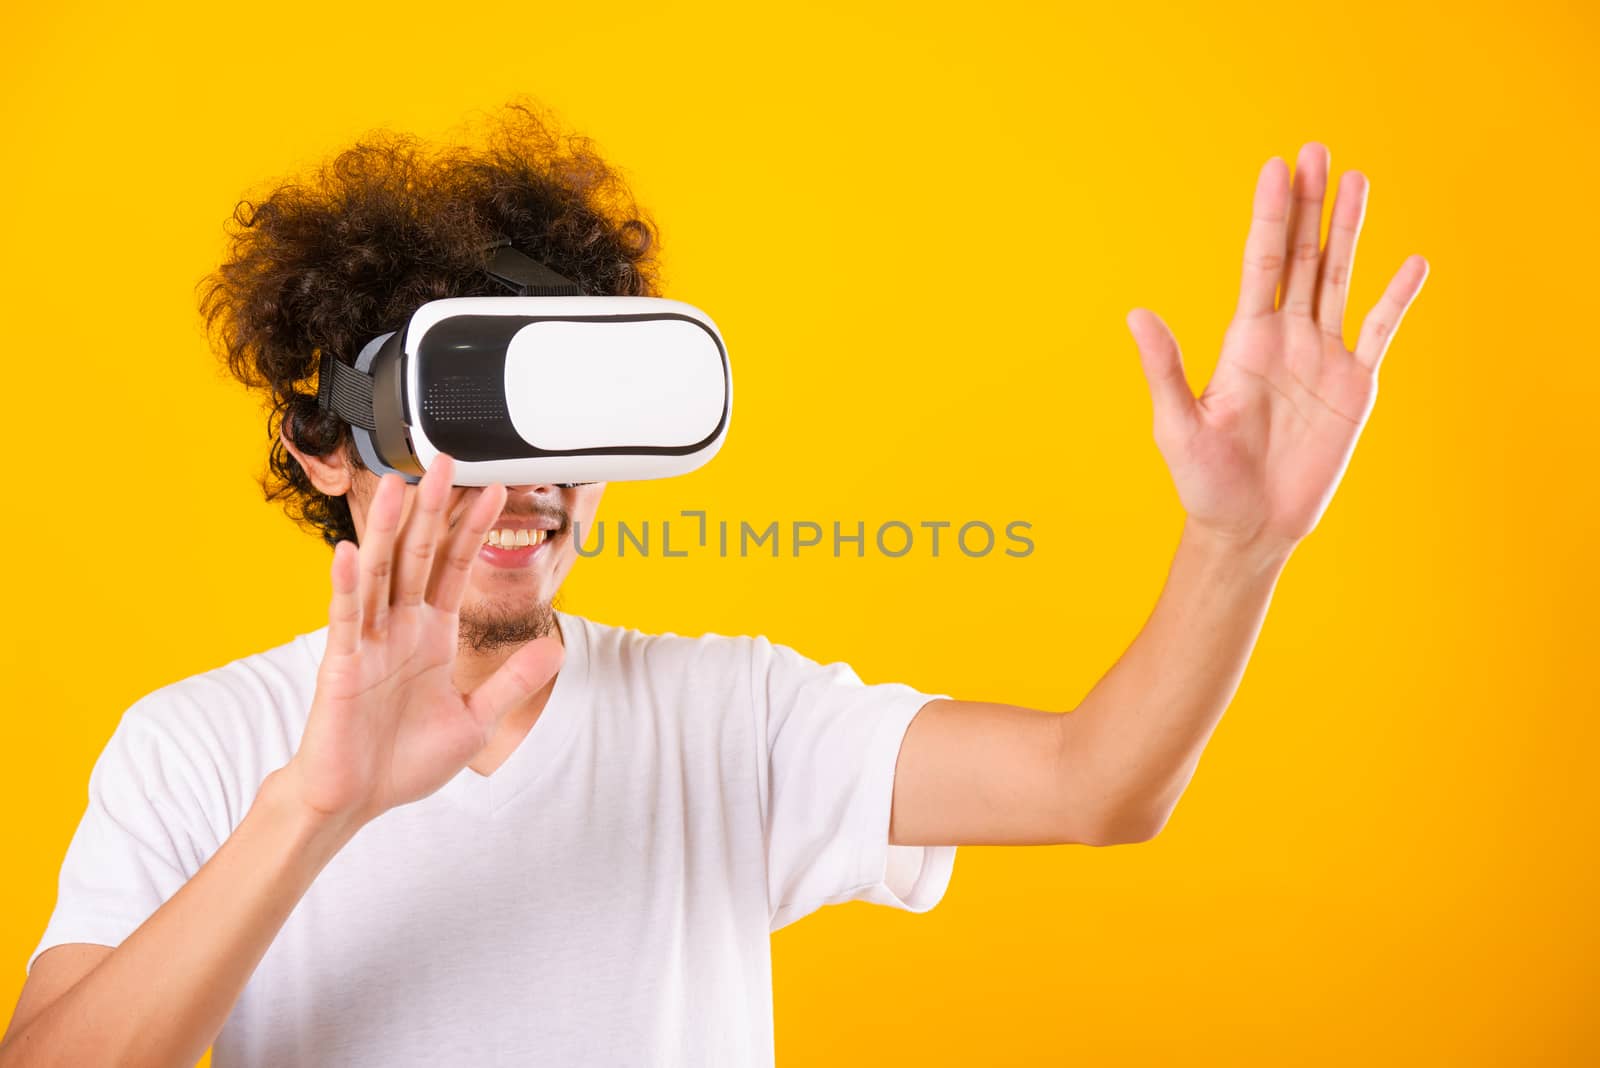 Asian handsome man with curly hair he using virtual reality headset or VR glass isolate on yellow background